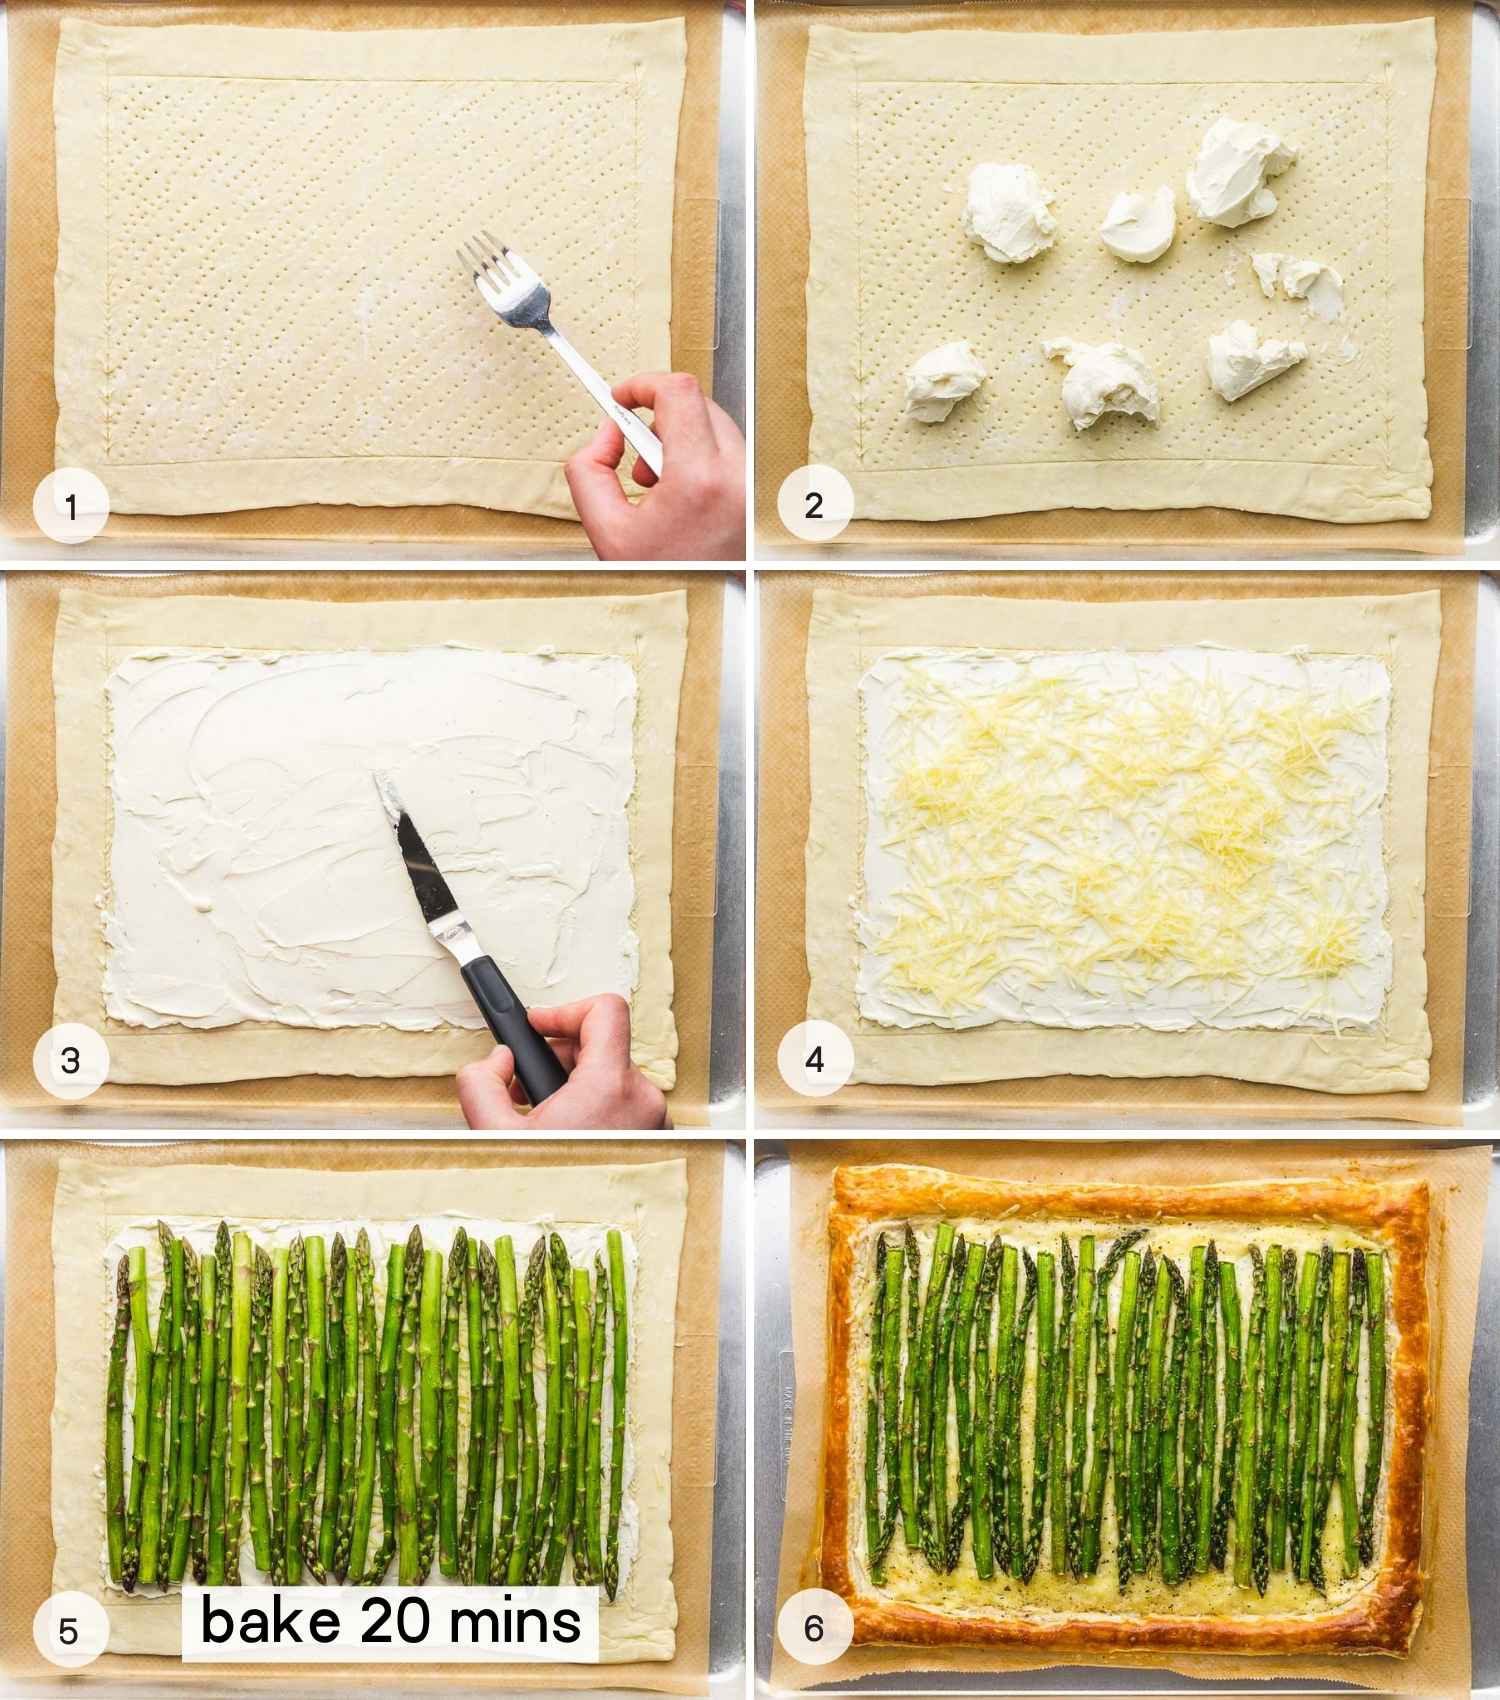 How to make an asparagus tart using puff pastry. A collage with 6 images.